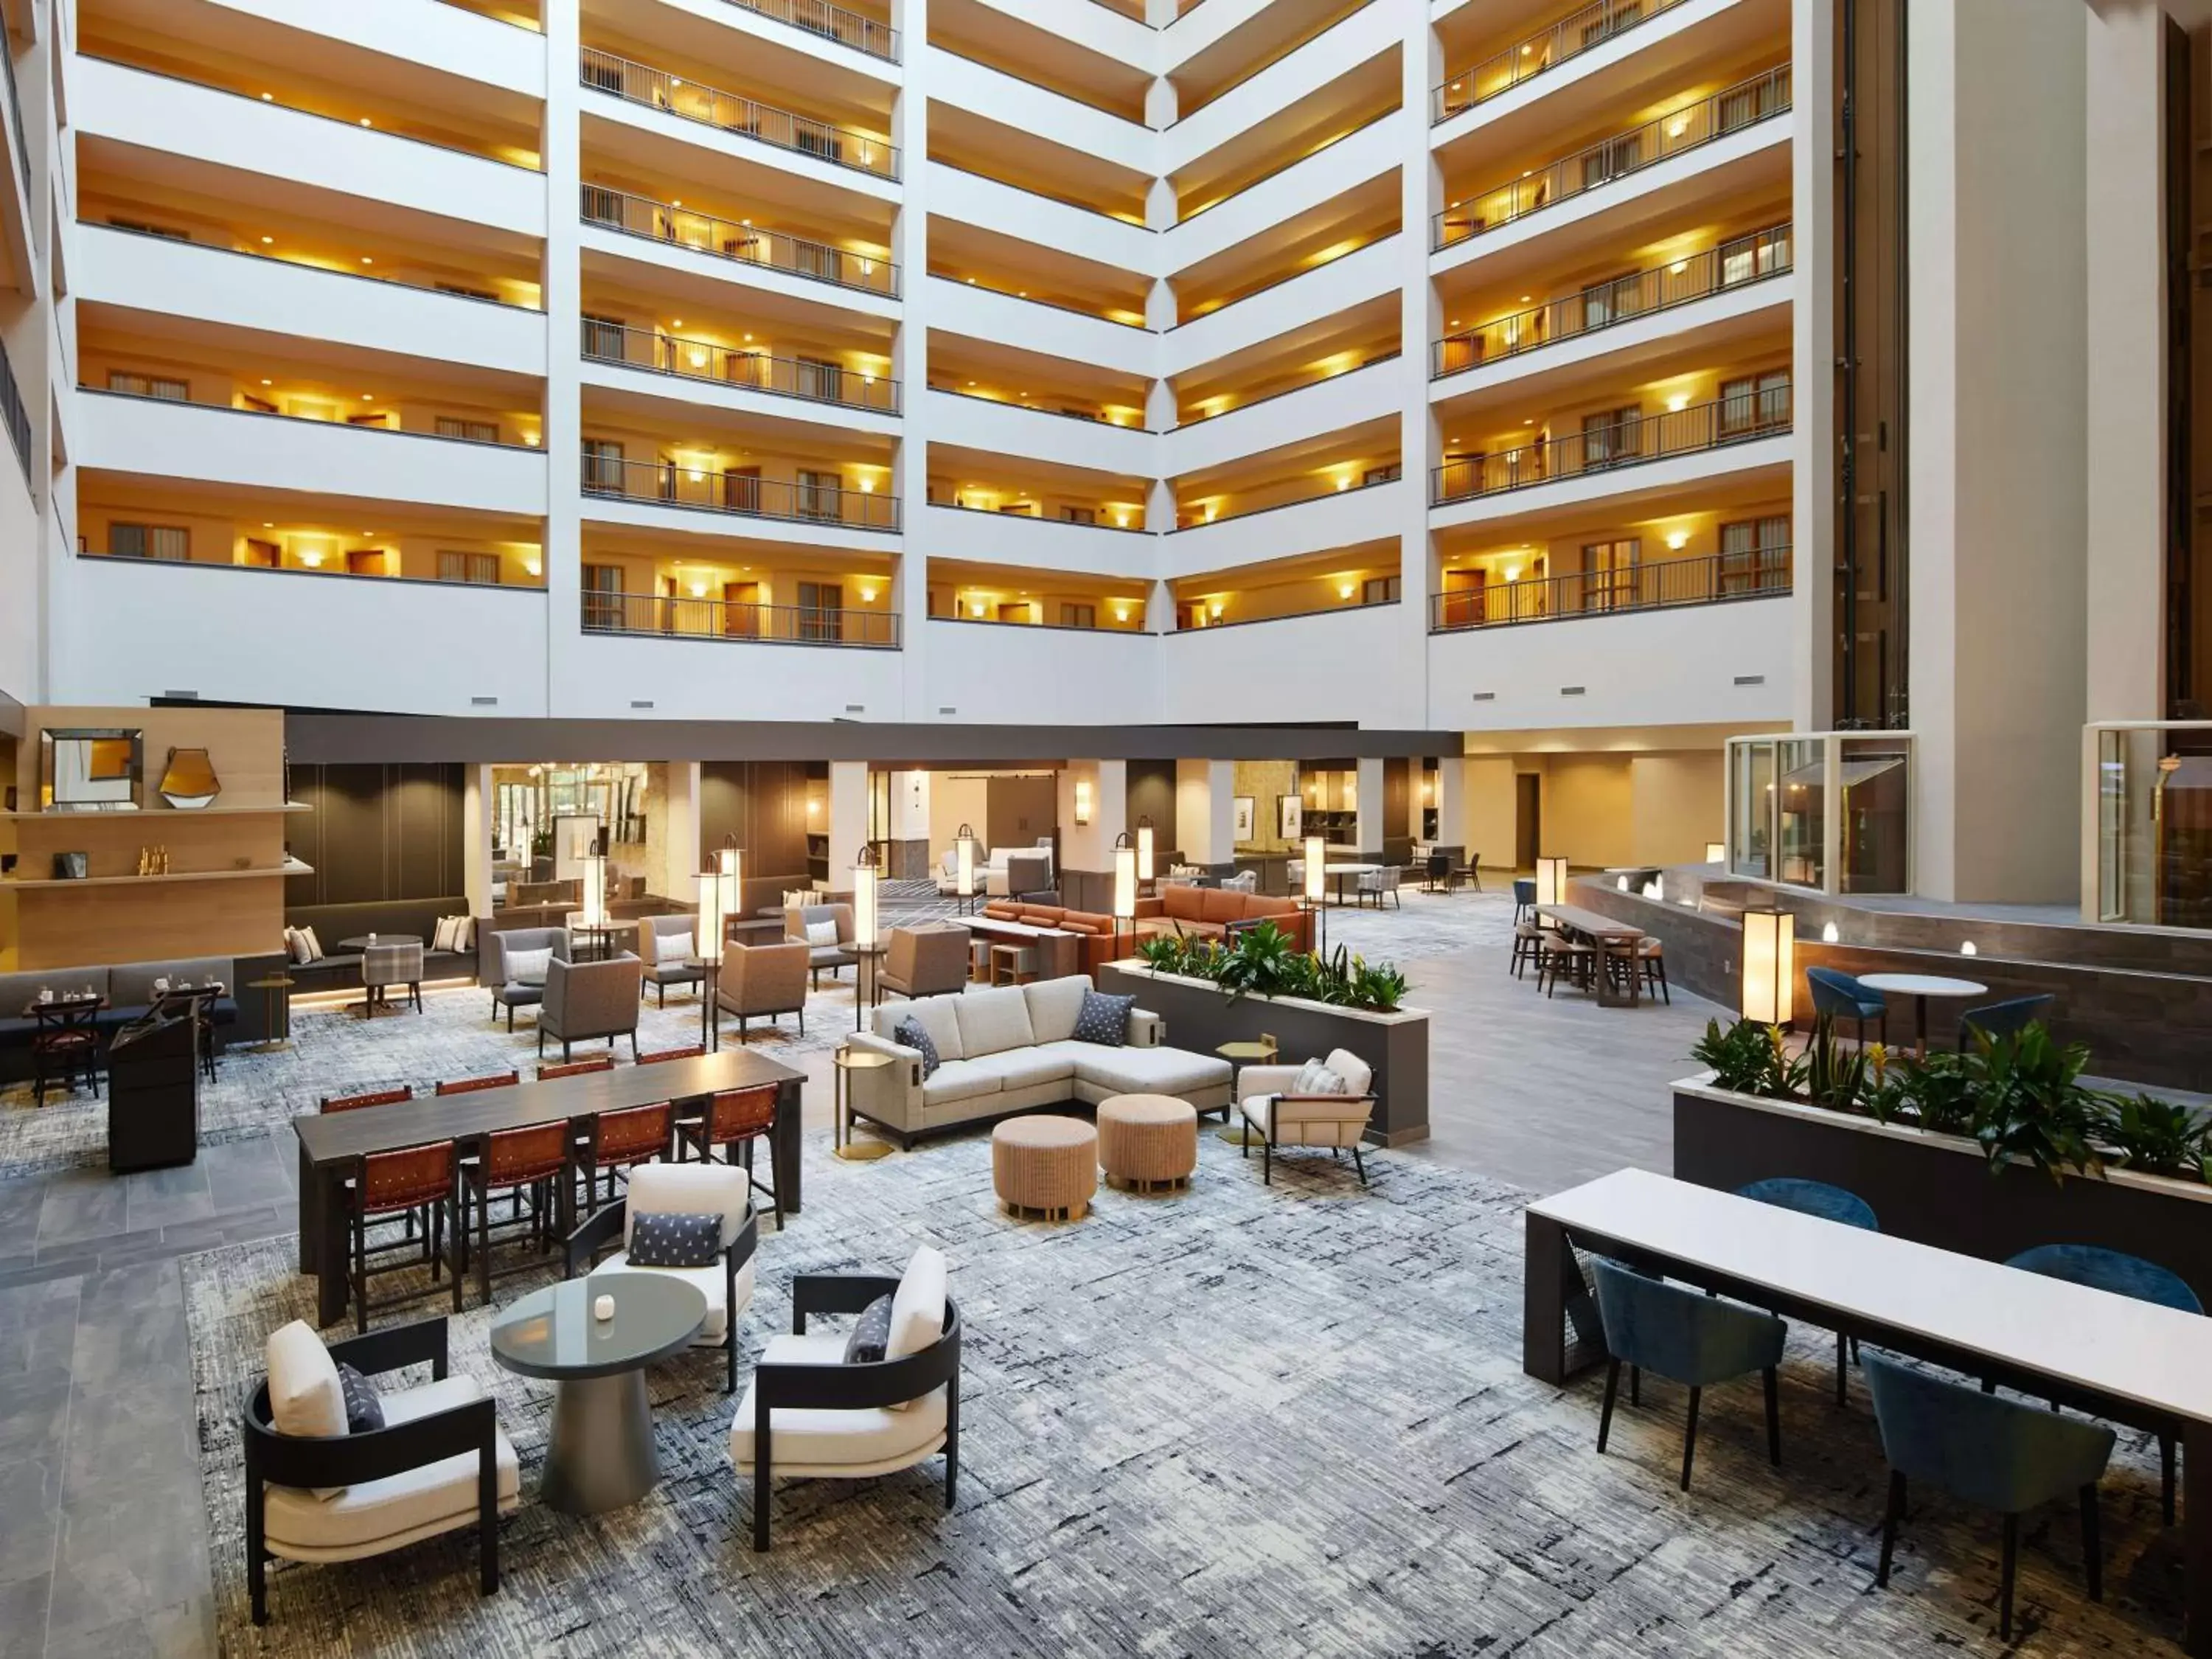 Lobby or reception in Hilton Charlotte Airport Hotel